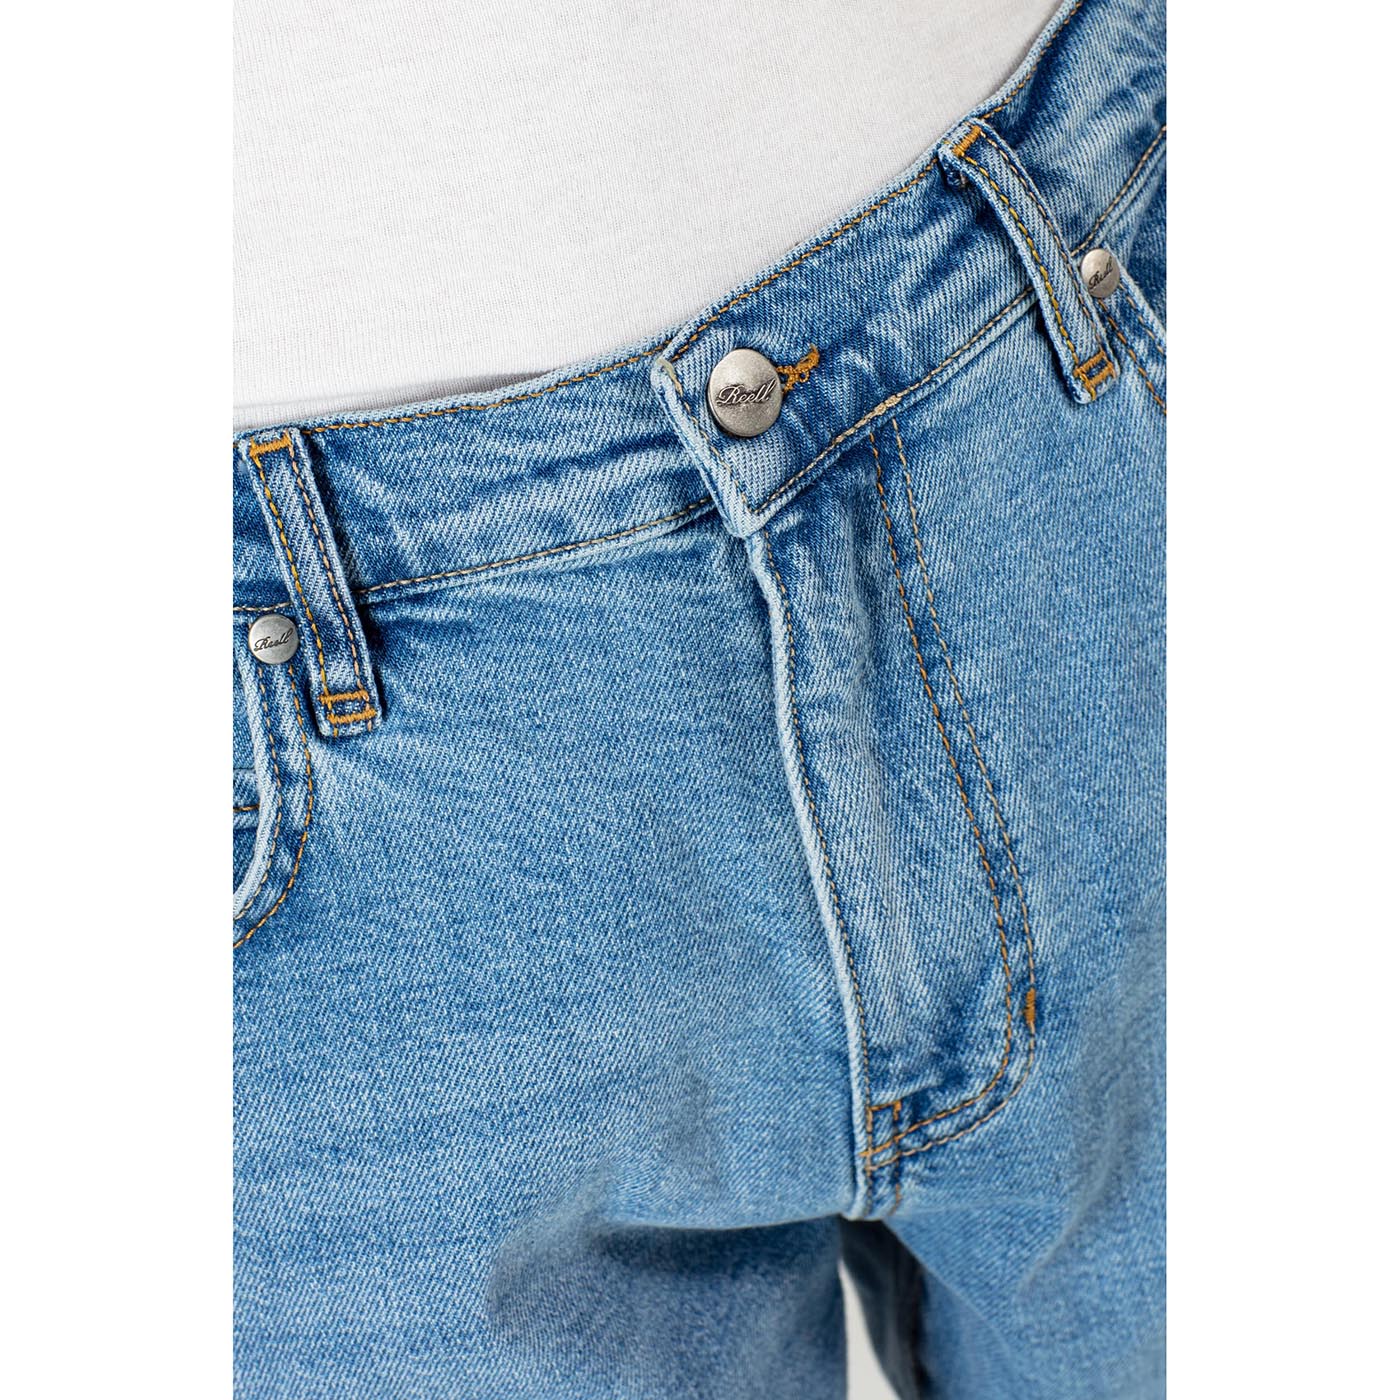 Reell Jeans Barfly Straight Fit Jeans Light Blue Stone